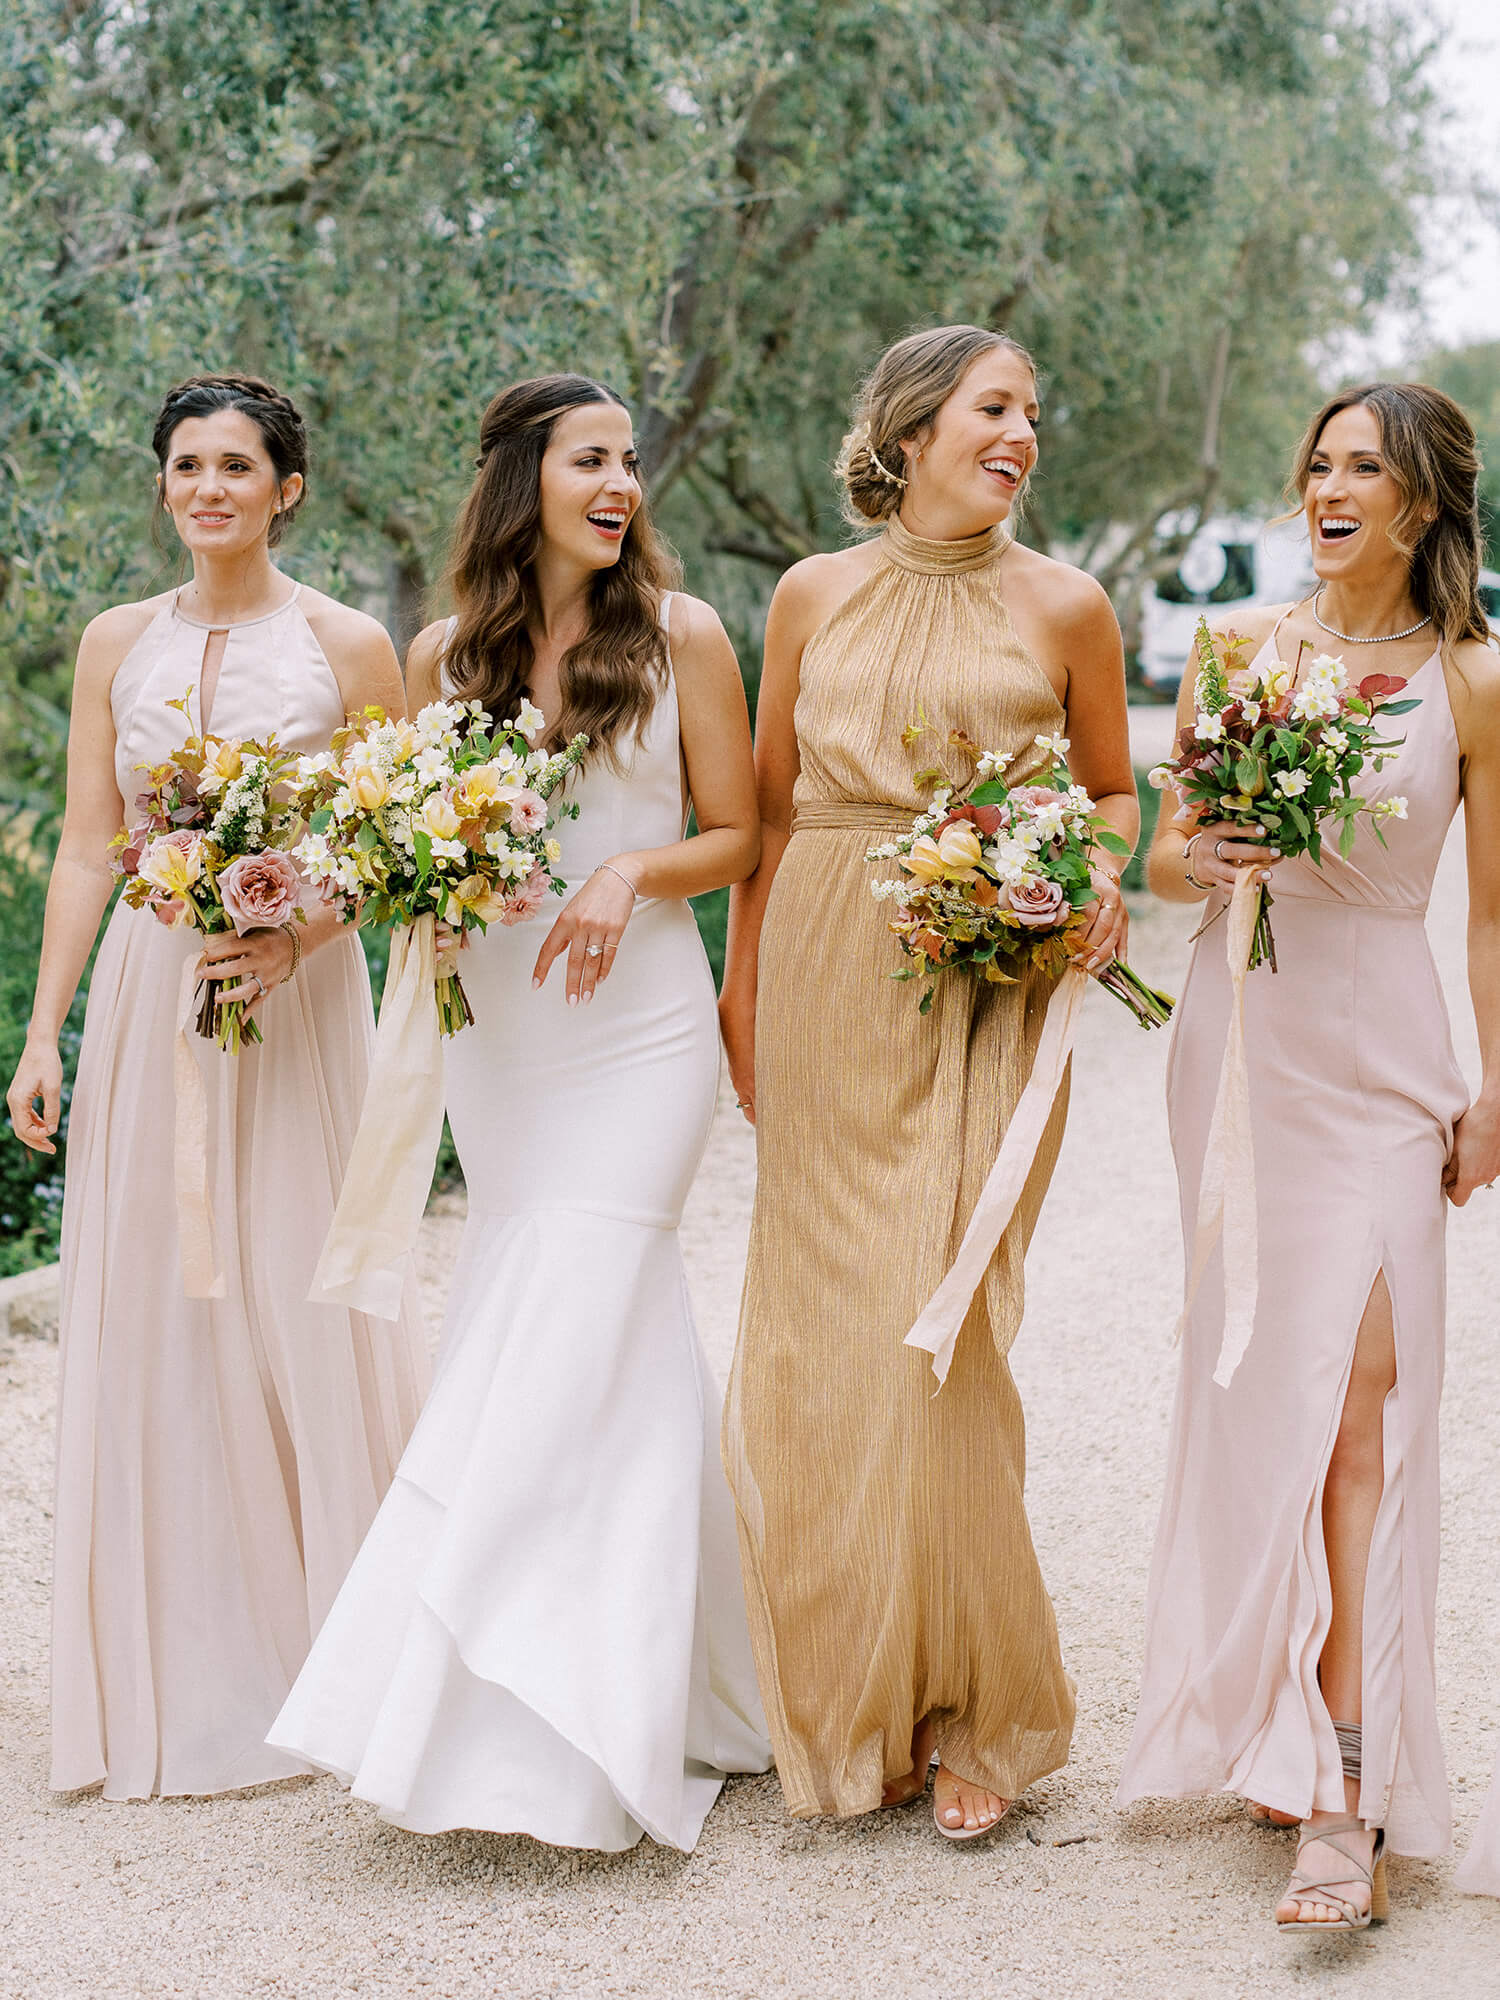 The Top 10 Colors for Wedding Dresses and their Meanings | JJsHouse